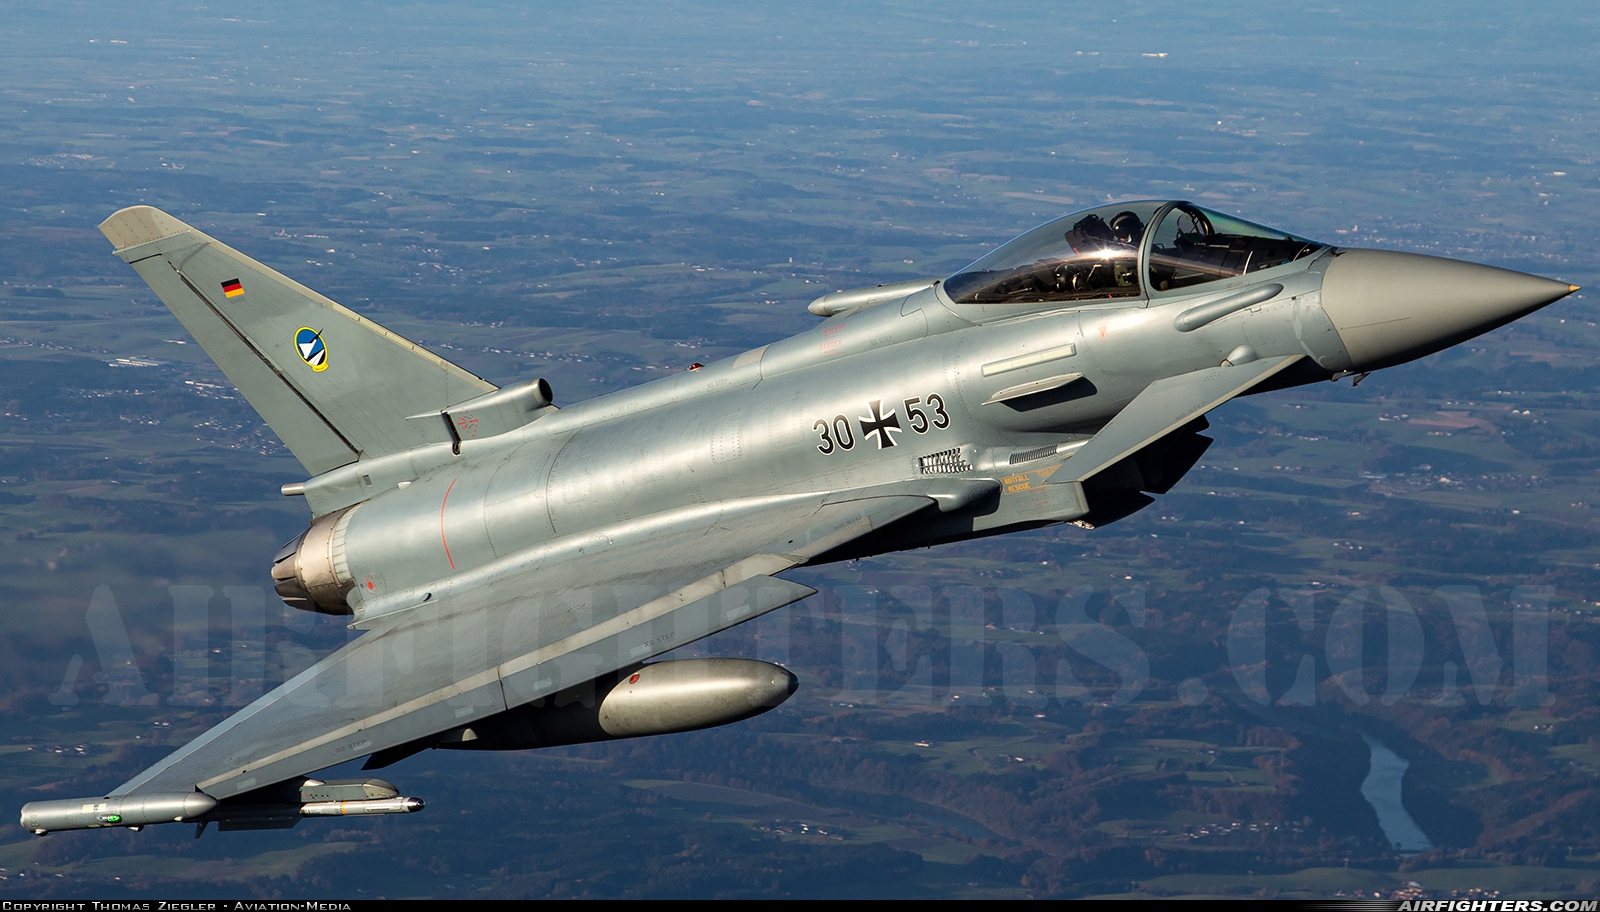 Germany - Air Force Eurofighter EF-2000 Typhoon S 30+53 at In Flight, Germany